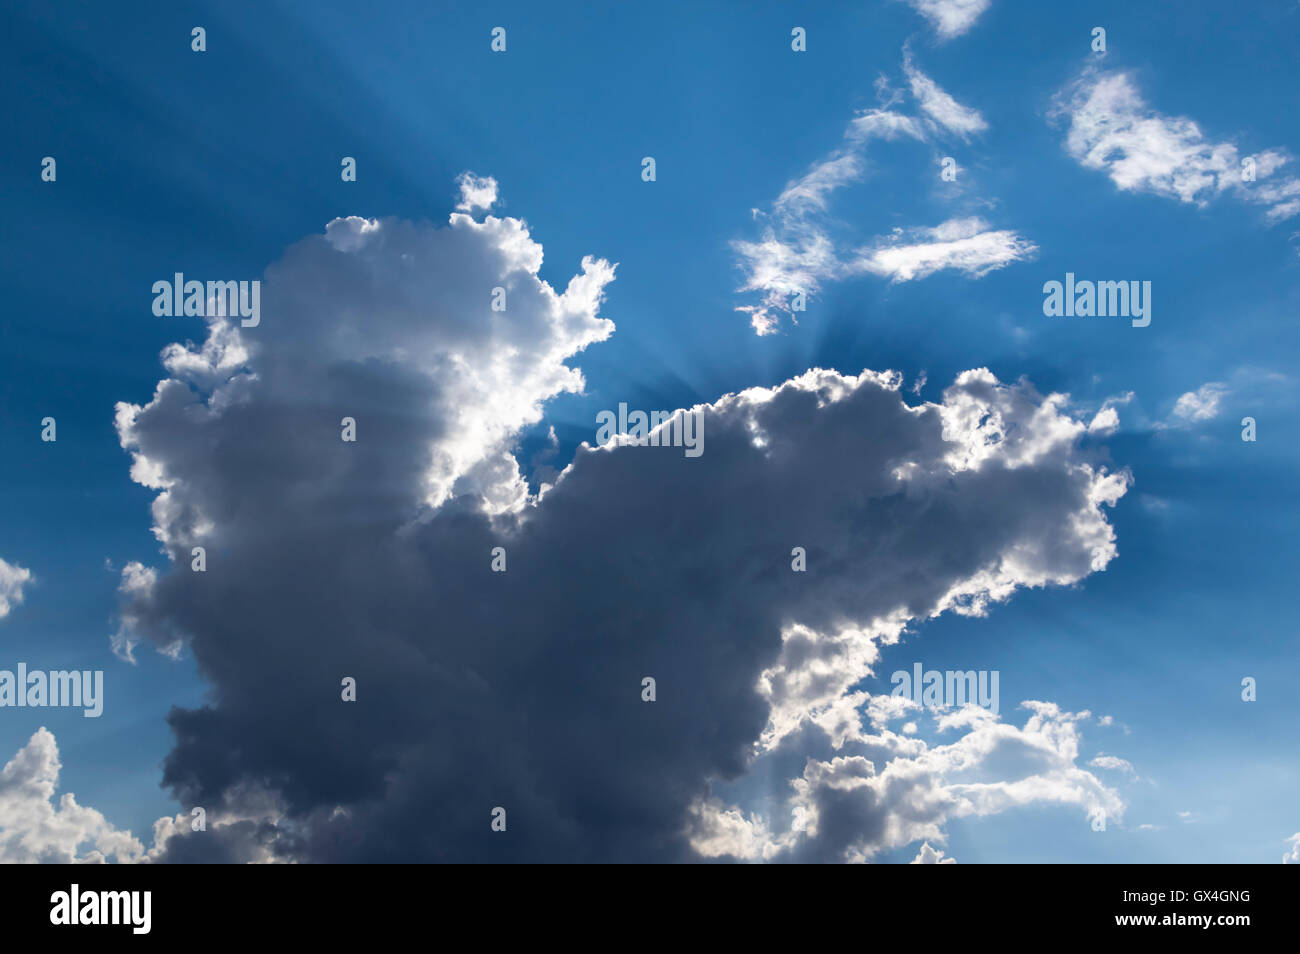 Cloud backlit by the sun, with sun rays clearly visible. Stock Photo